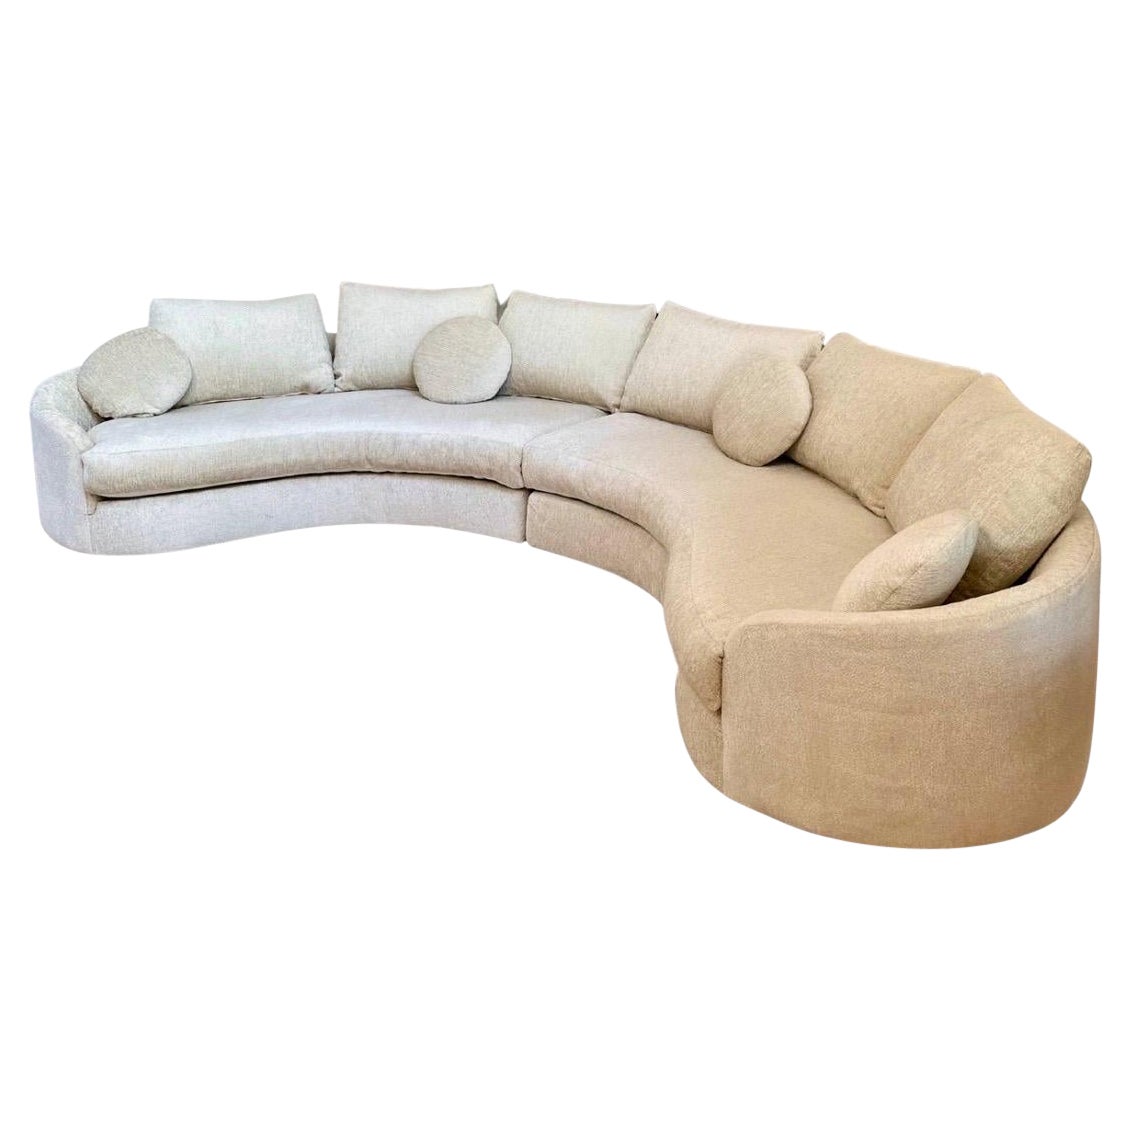 Adrian Pearsall for Craft Associates Two-Piece Curved Sectional For Sale